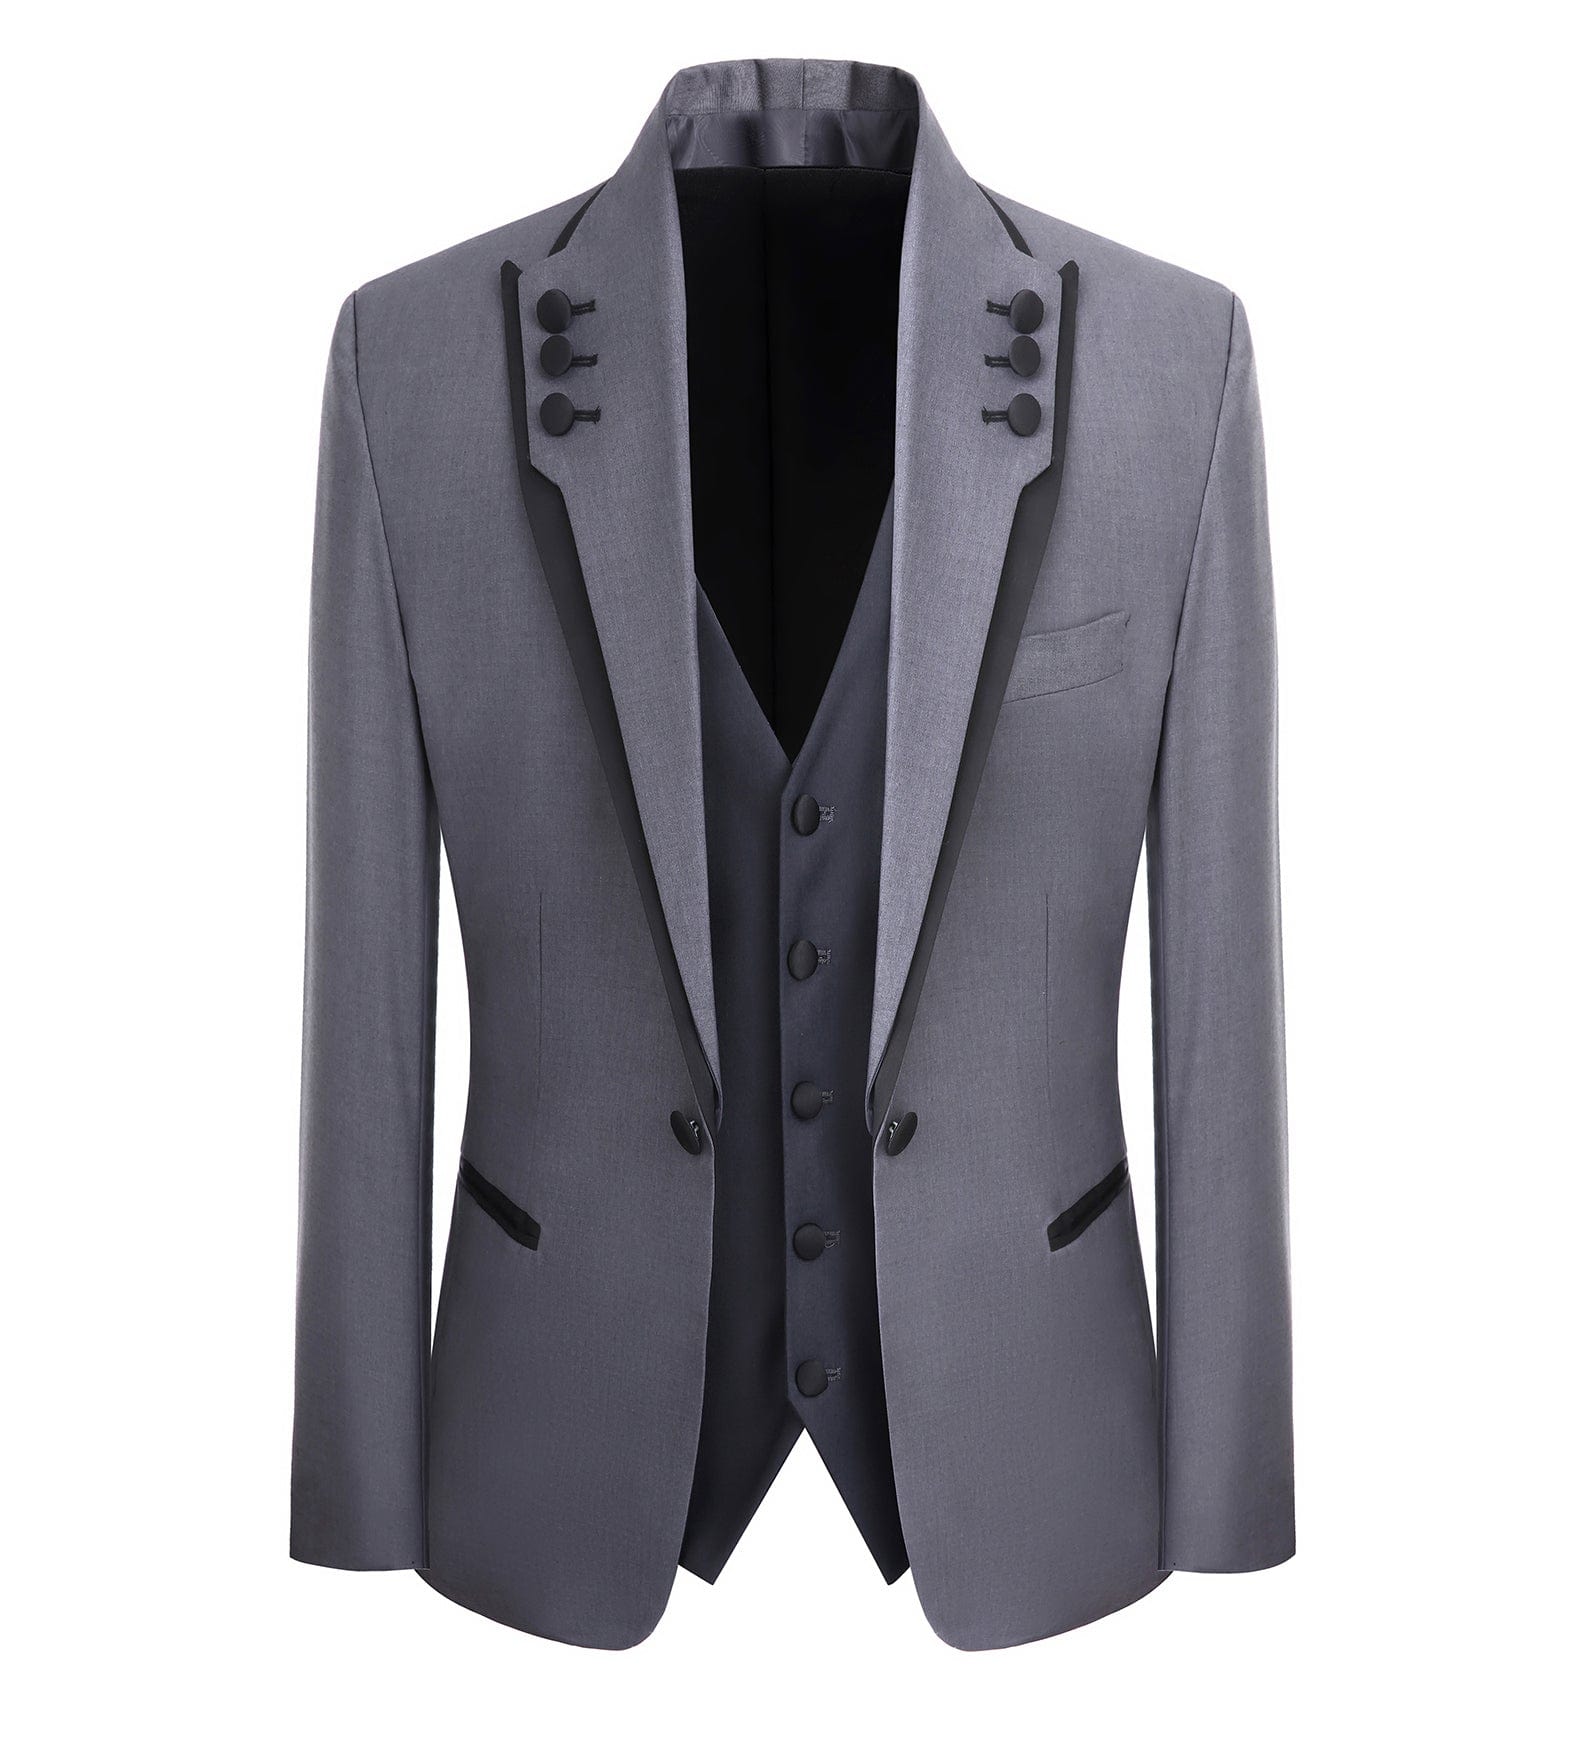 ceehuteey Western Mens 3 Piece Suit Blazer Vest Pant for for wedding party